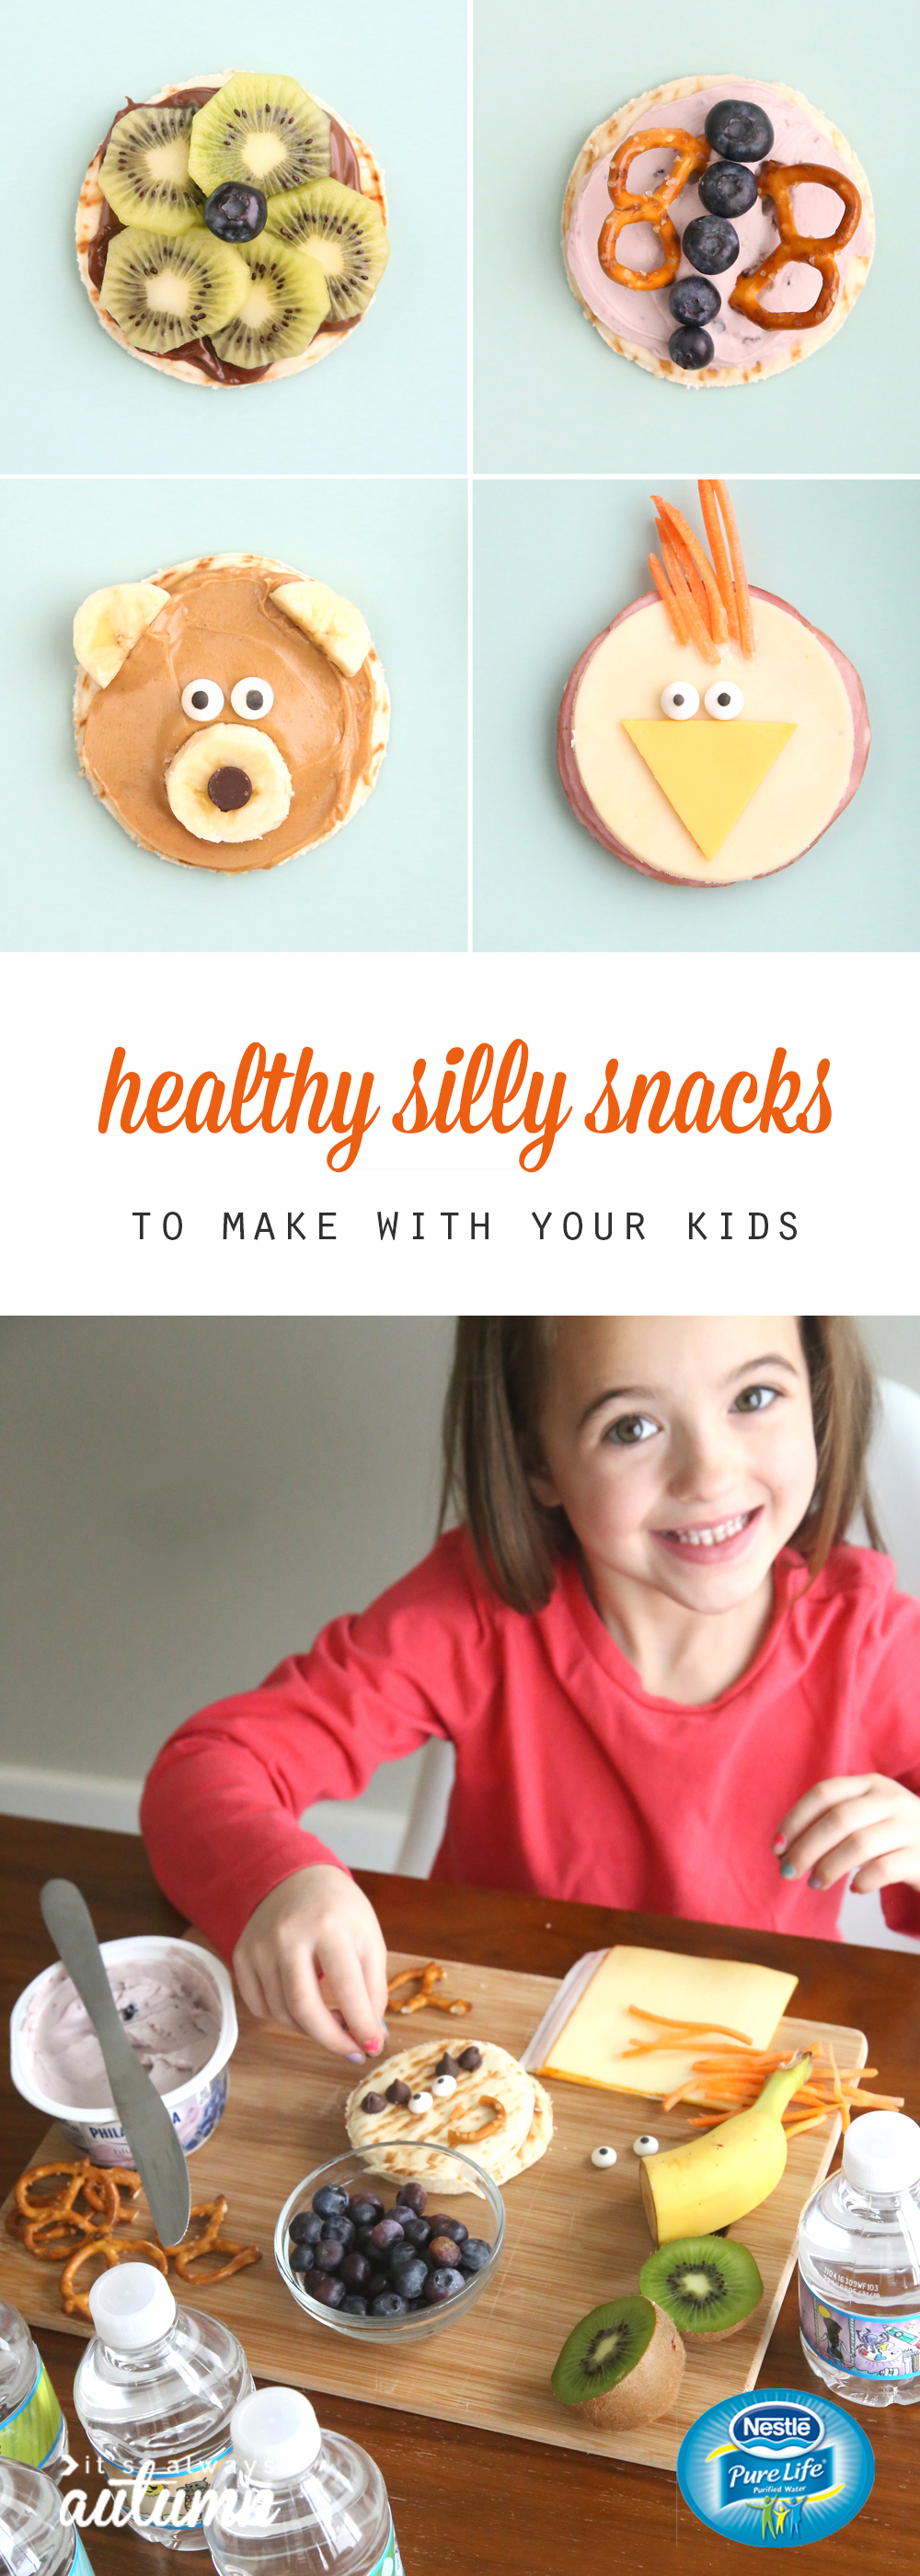 healthy snack ideas for kids that are decorated to look like animals